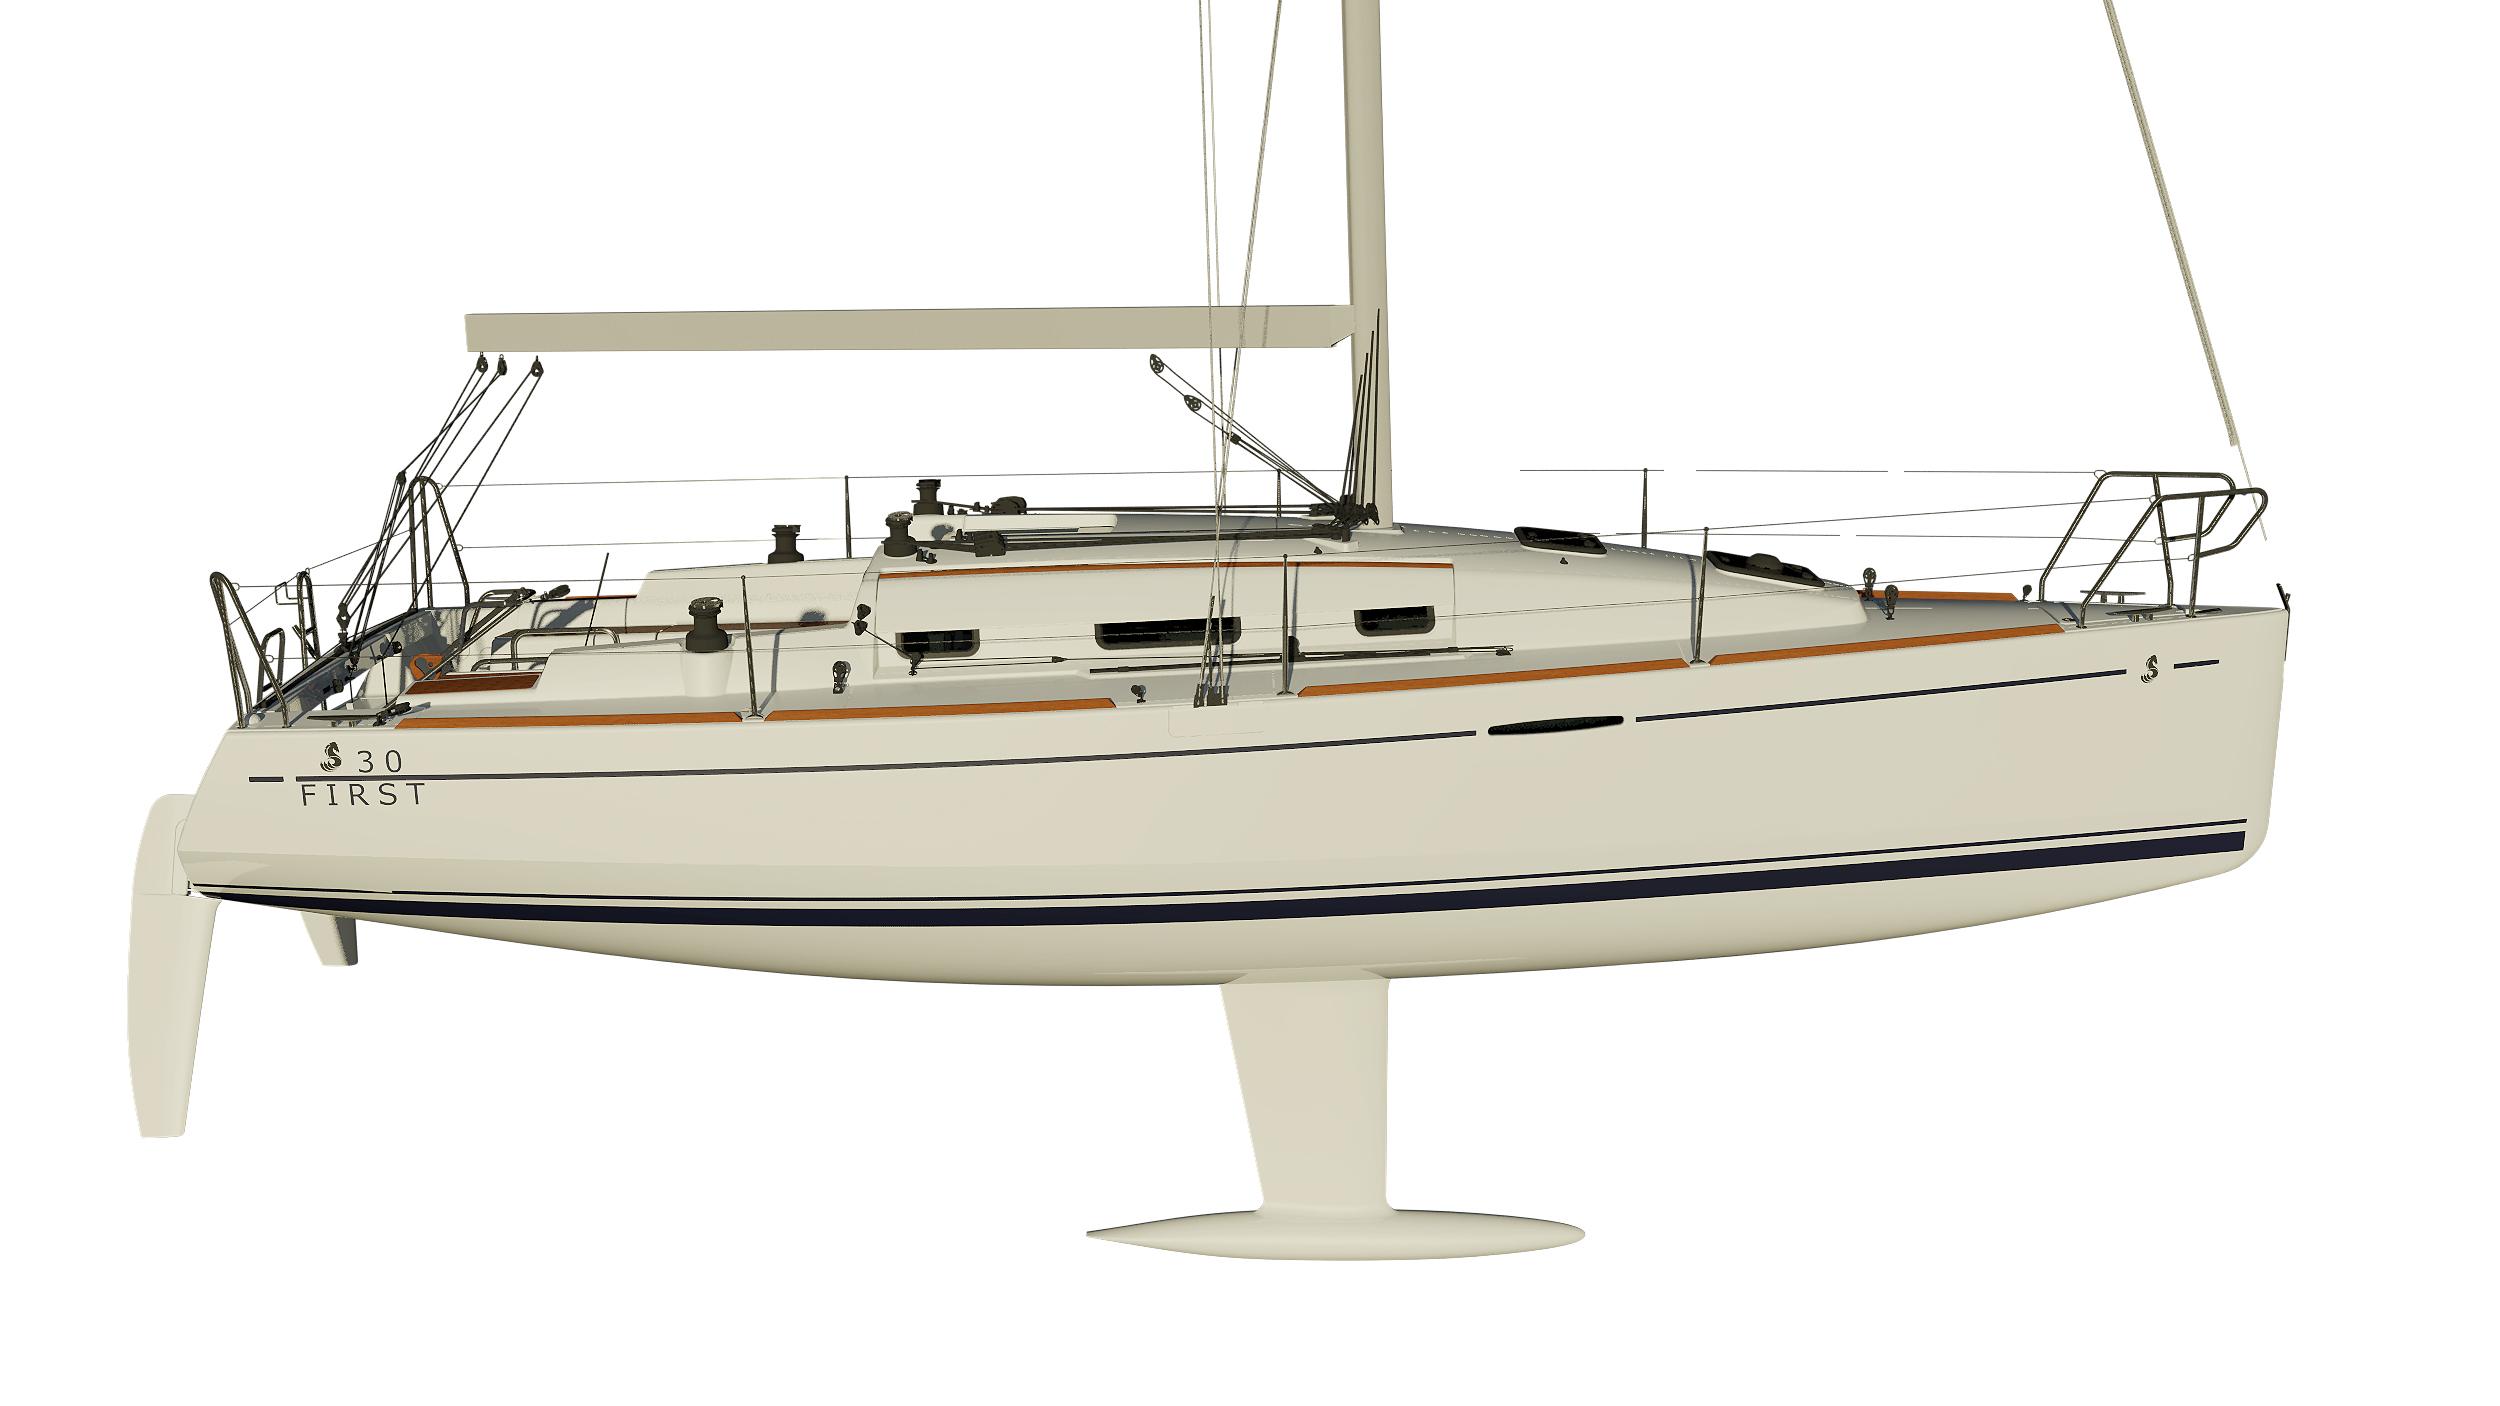 NEW YACHTS - Beneteau First 30